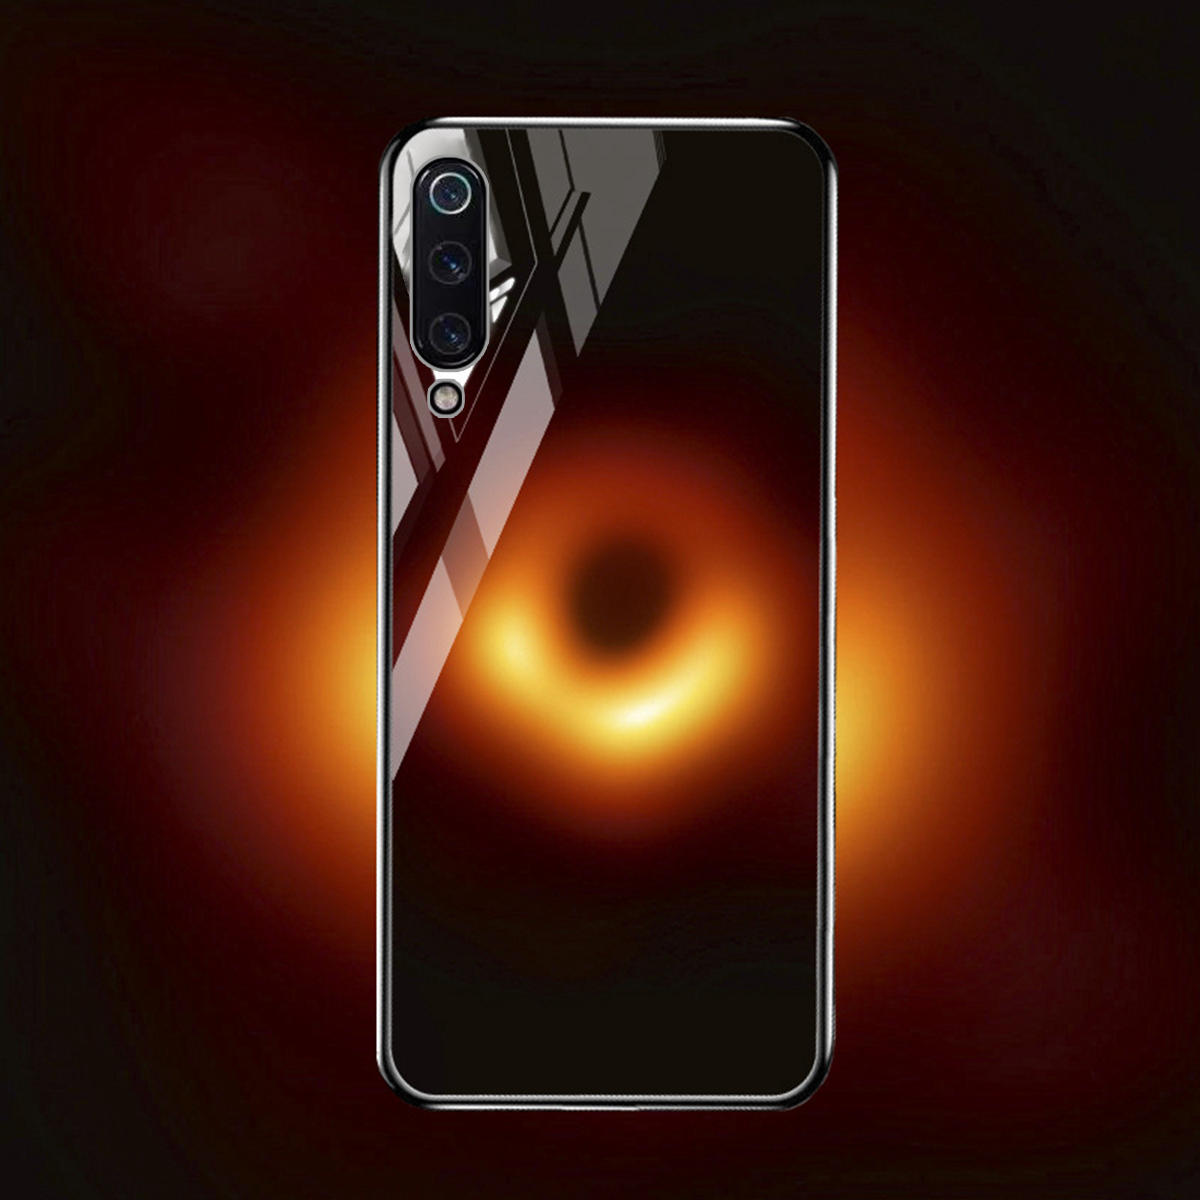 

Bakeey Black Hole Scratch Resistant Tempered Glass Protective Case For Xiaomi Mi 9 / Xiaomi Mi9 Transparent Edition Non-